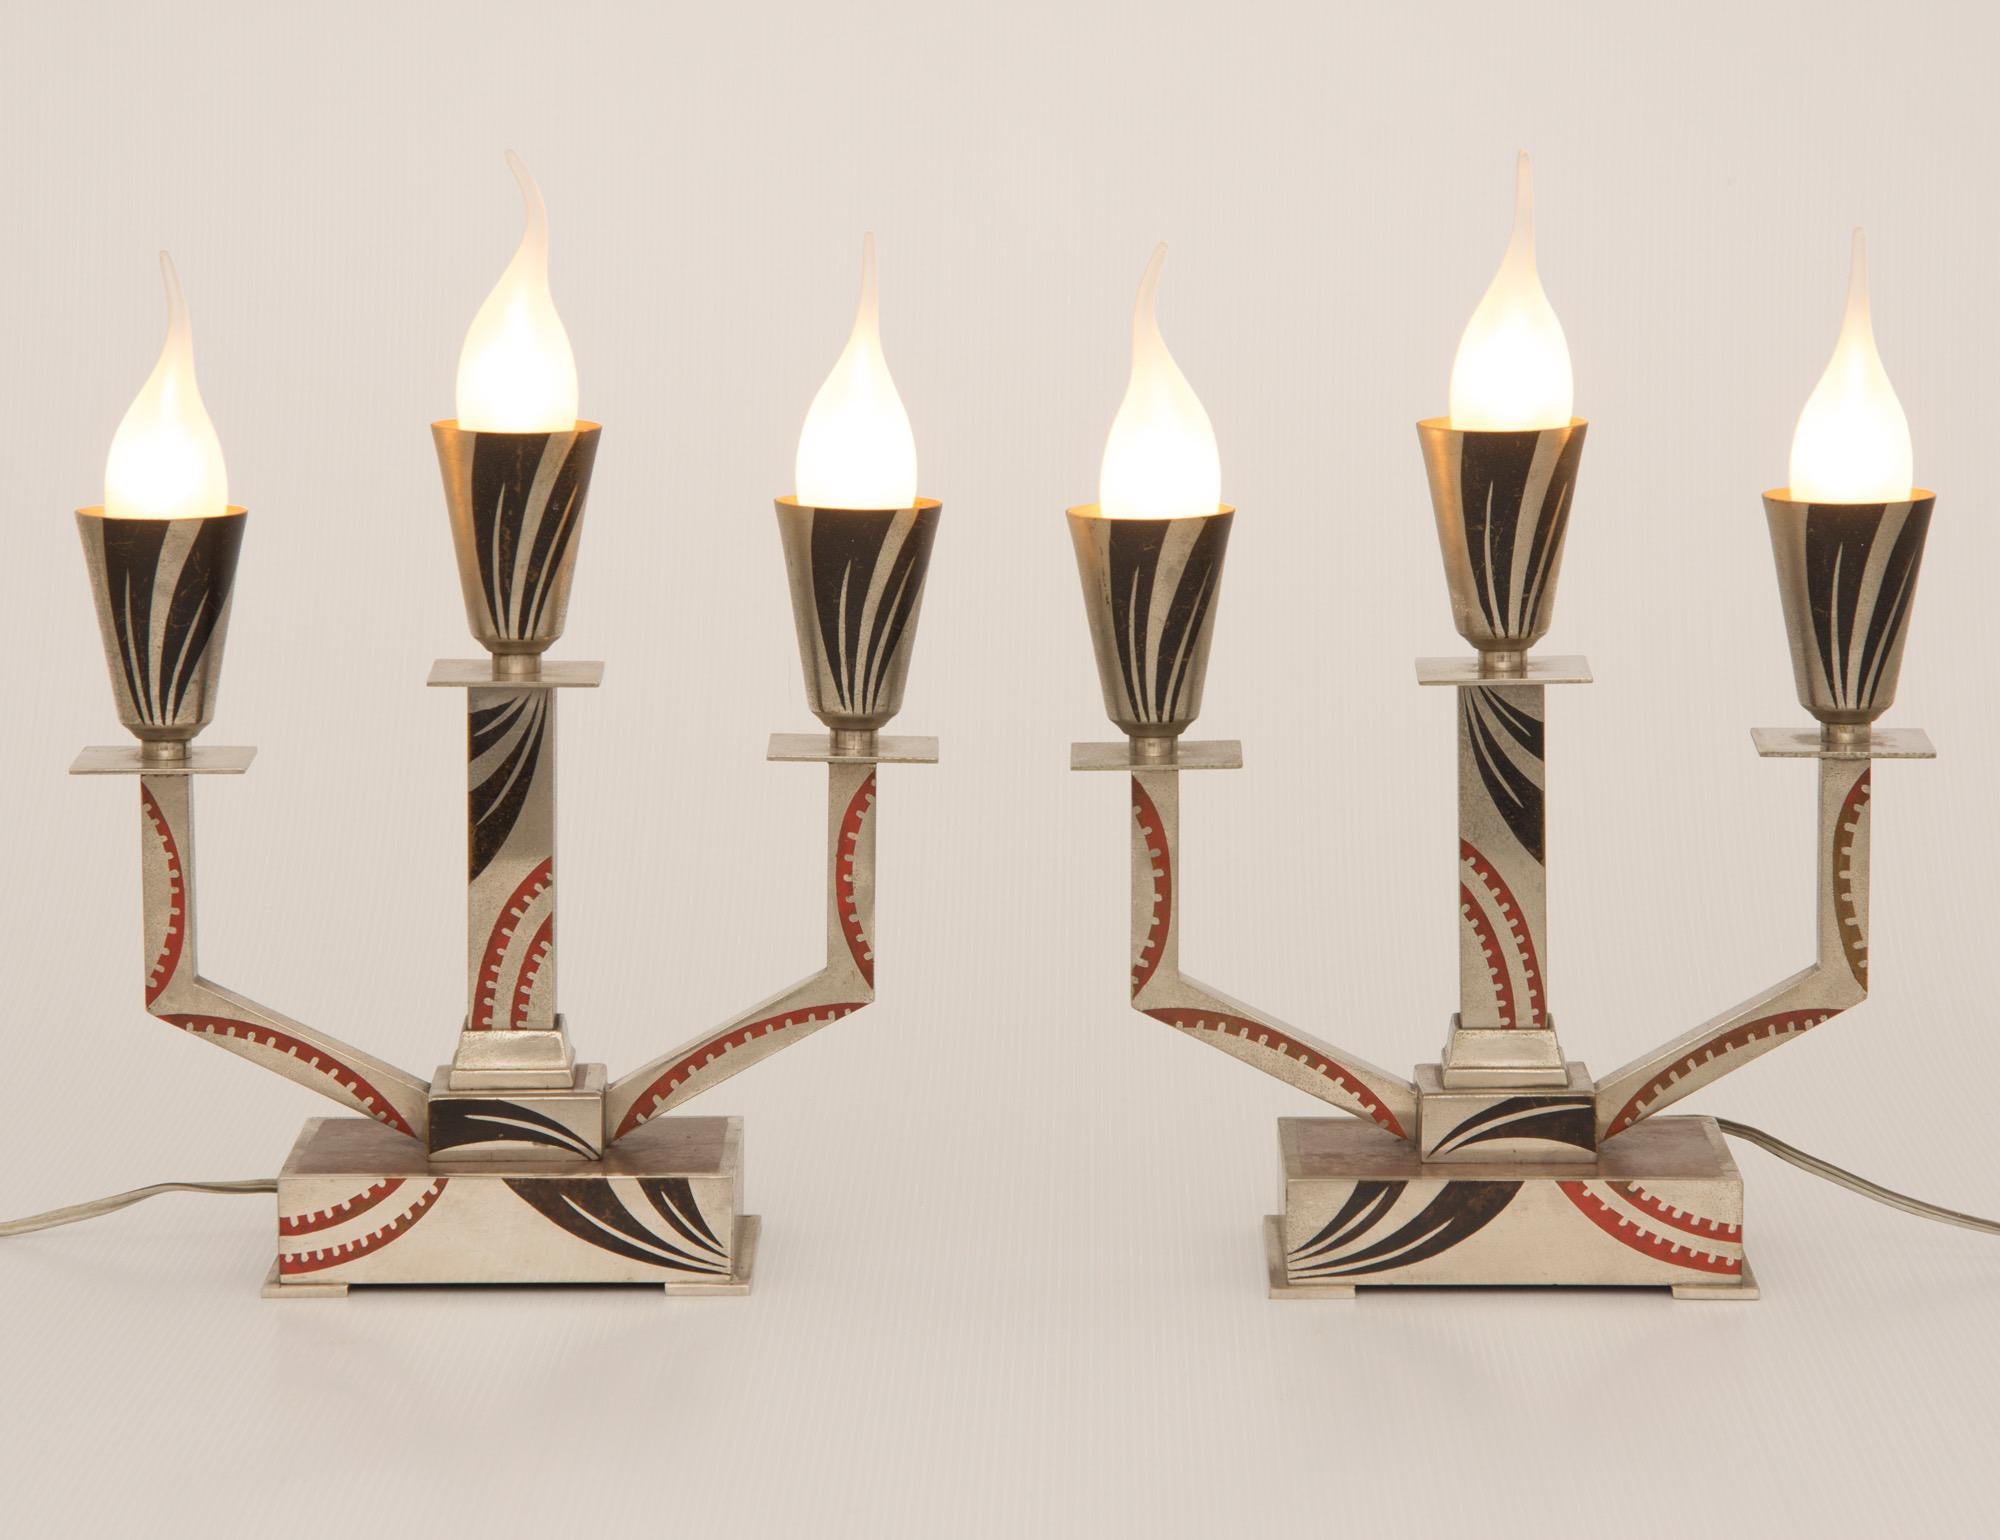 An impressive pair of art deco candelabra lamps.
triple branch candelabra lamps, Nickel Plated Steel with Red & Black Lacquered Geometric Design.
Designed by M offner.
H:34 cm W: 25 cm D: 11 cm
French c 1930